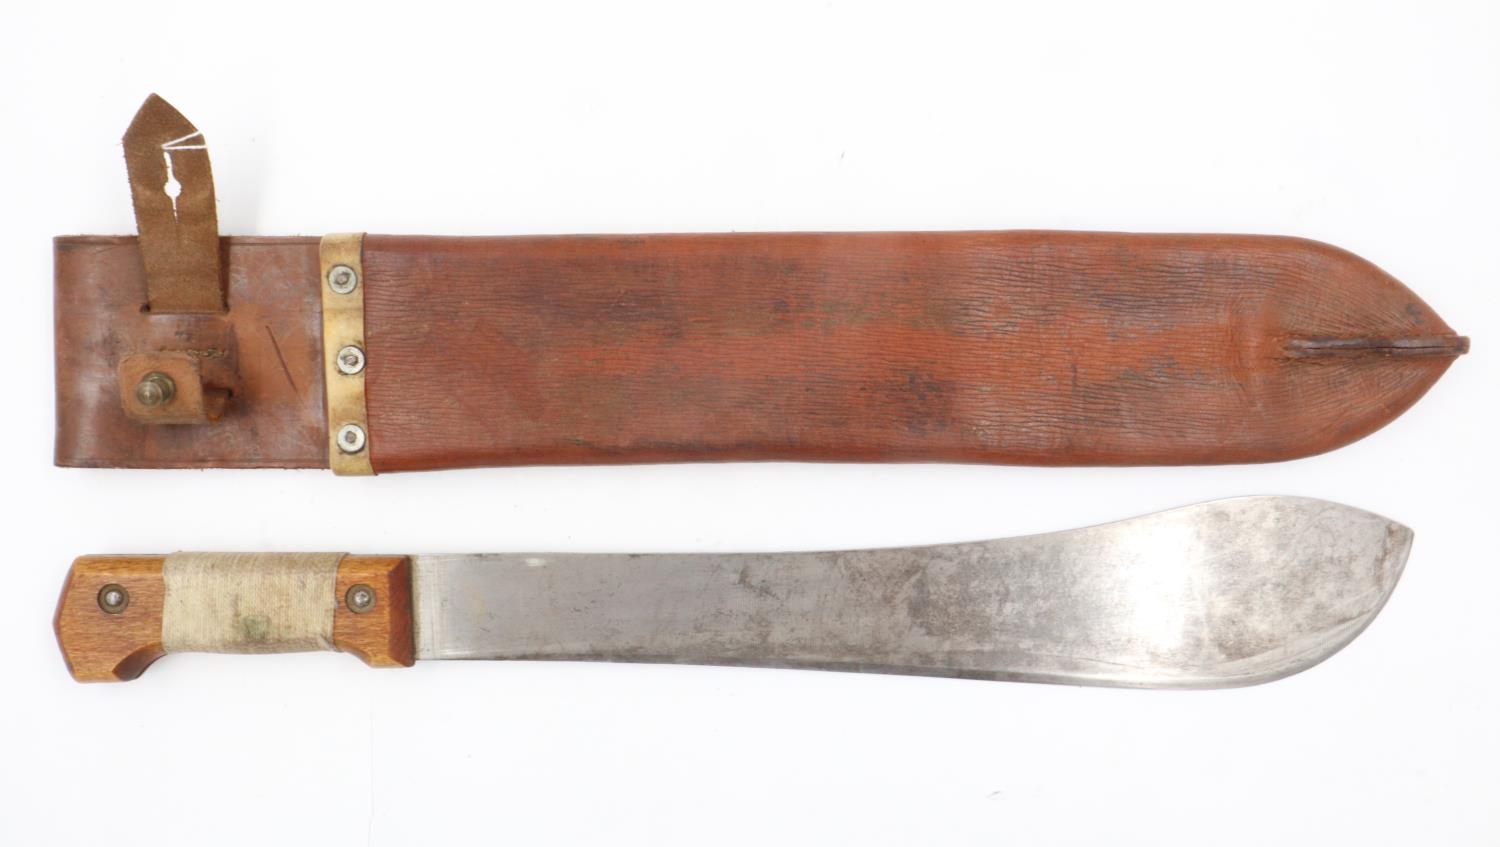 Tramontina (Brazil) machete with leather sheath. UK P&P Group 2 (£20+VAT for the first lot and £4+